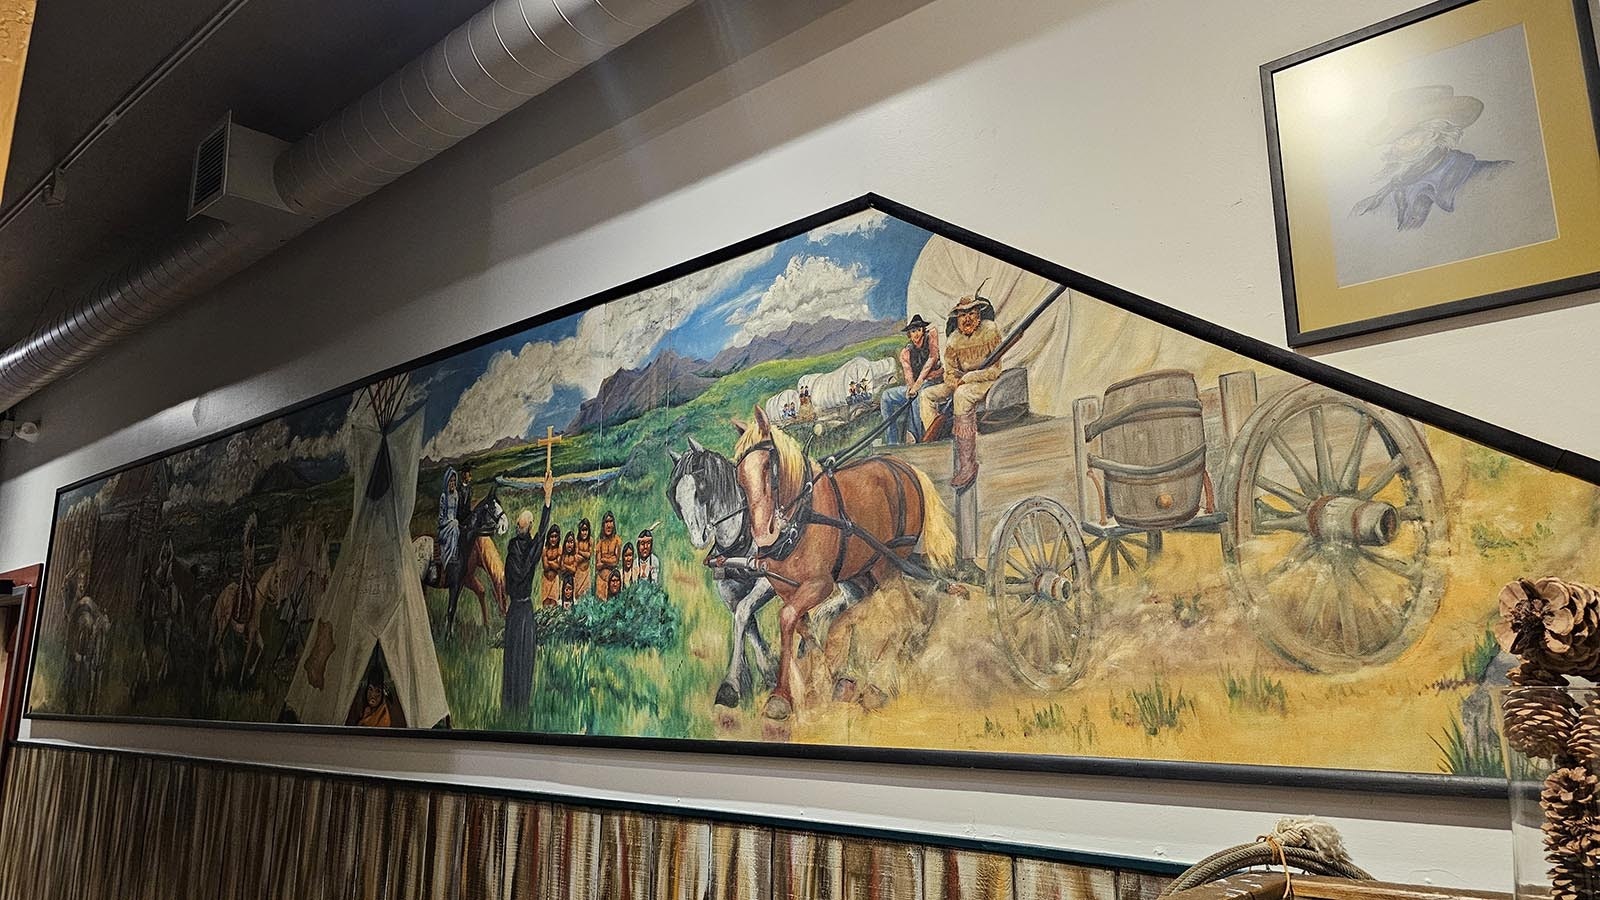 Buck Buchenroth found this depiction of the Green River Rendezvous in a barn in pieces. He put it back together again and brought it to Stockman's Saloon and Steakhouse.